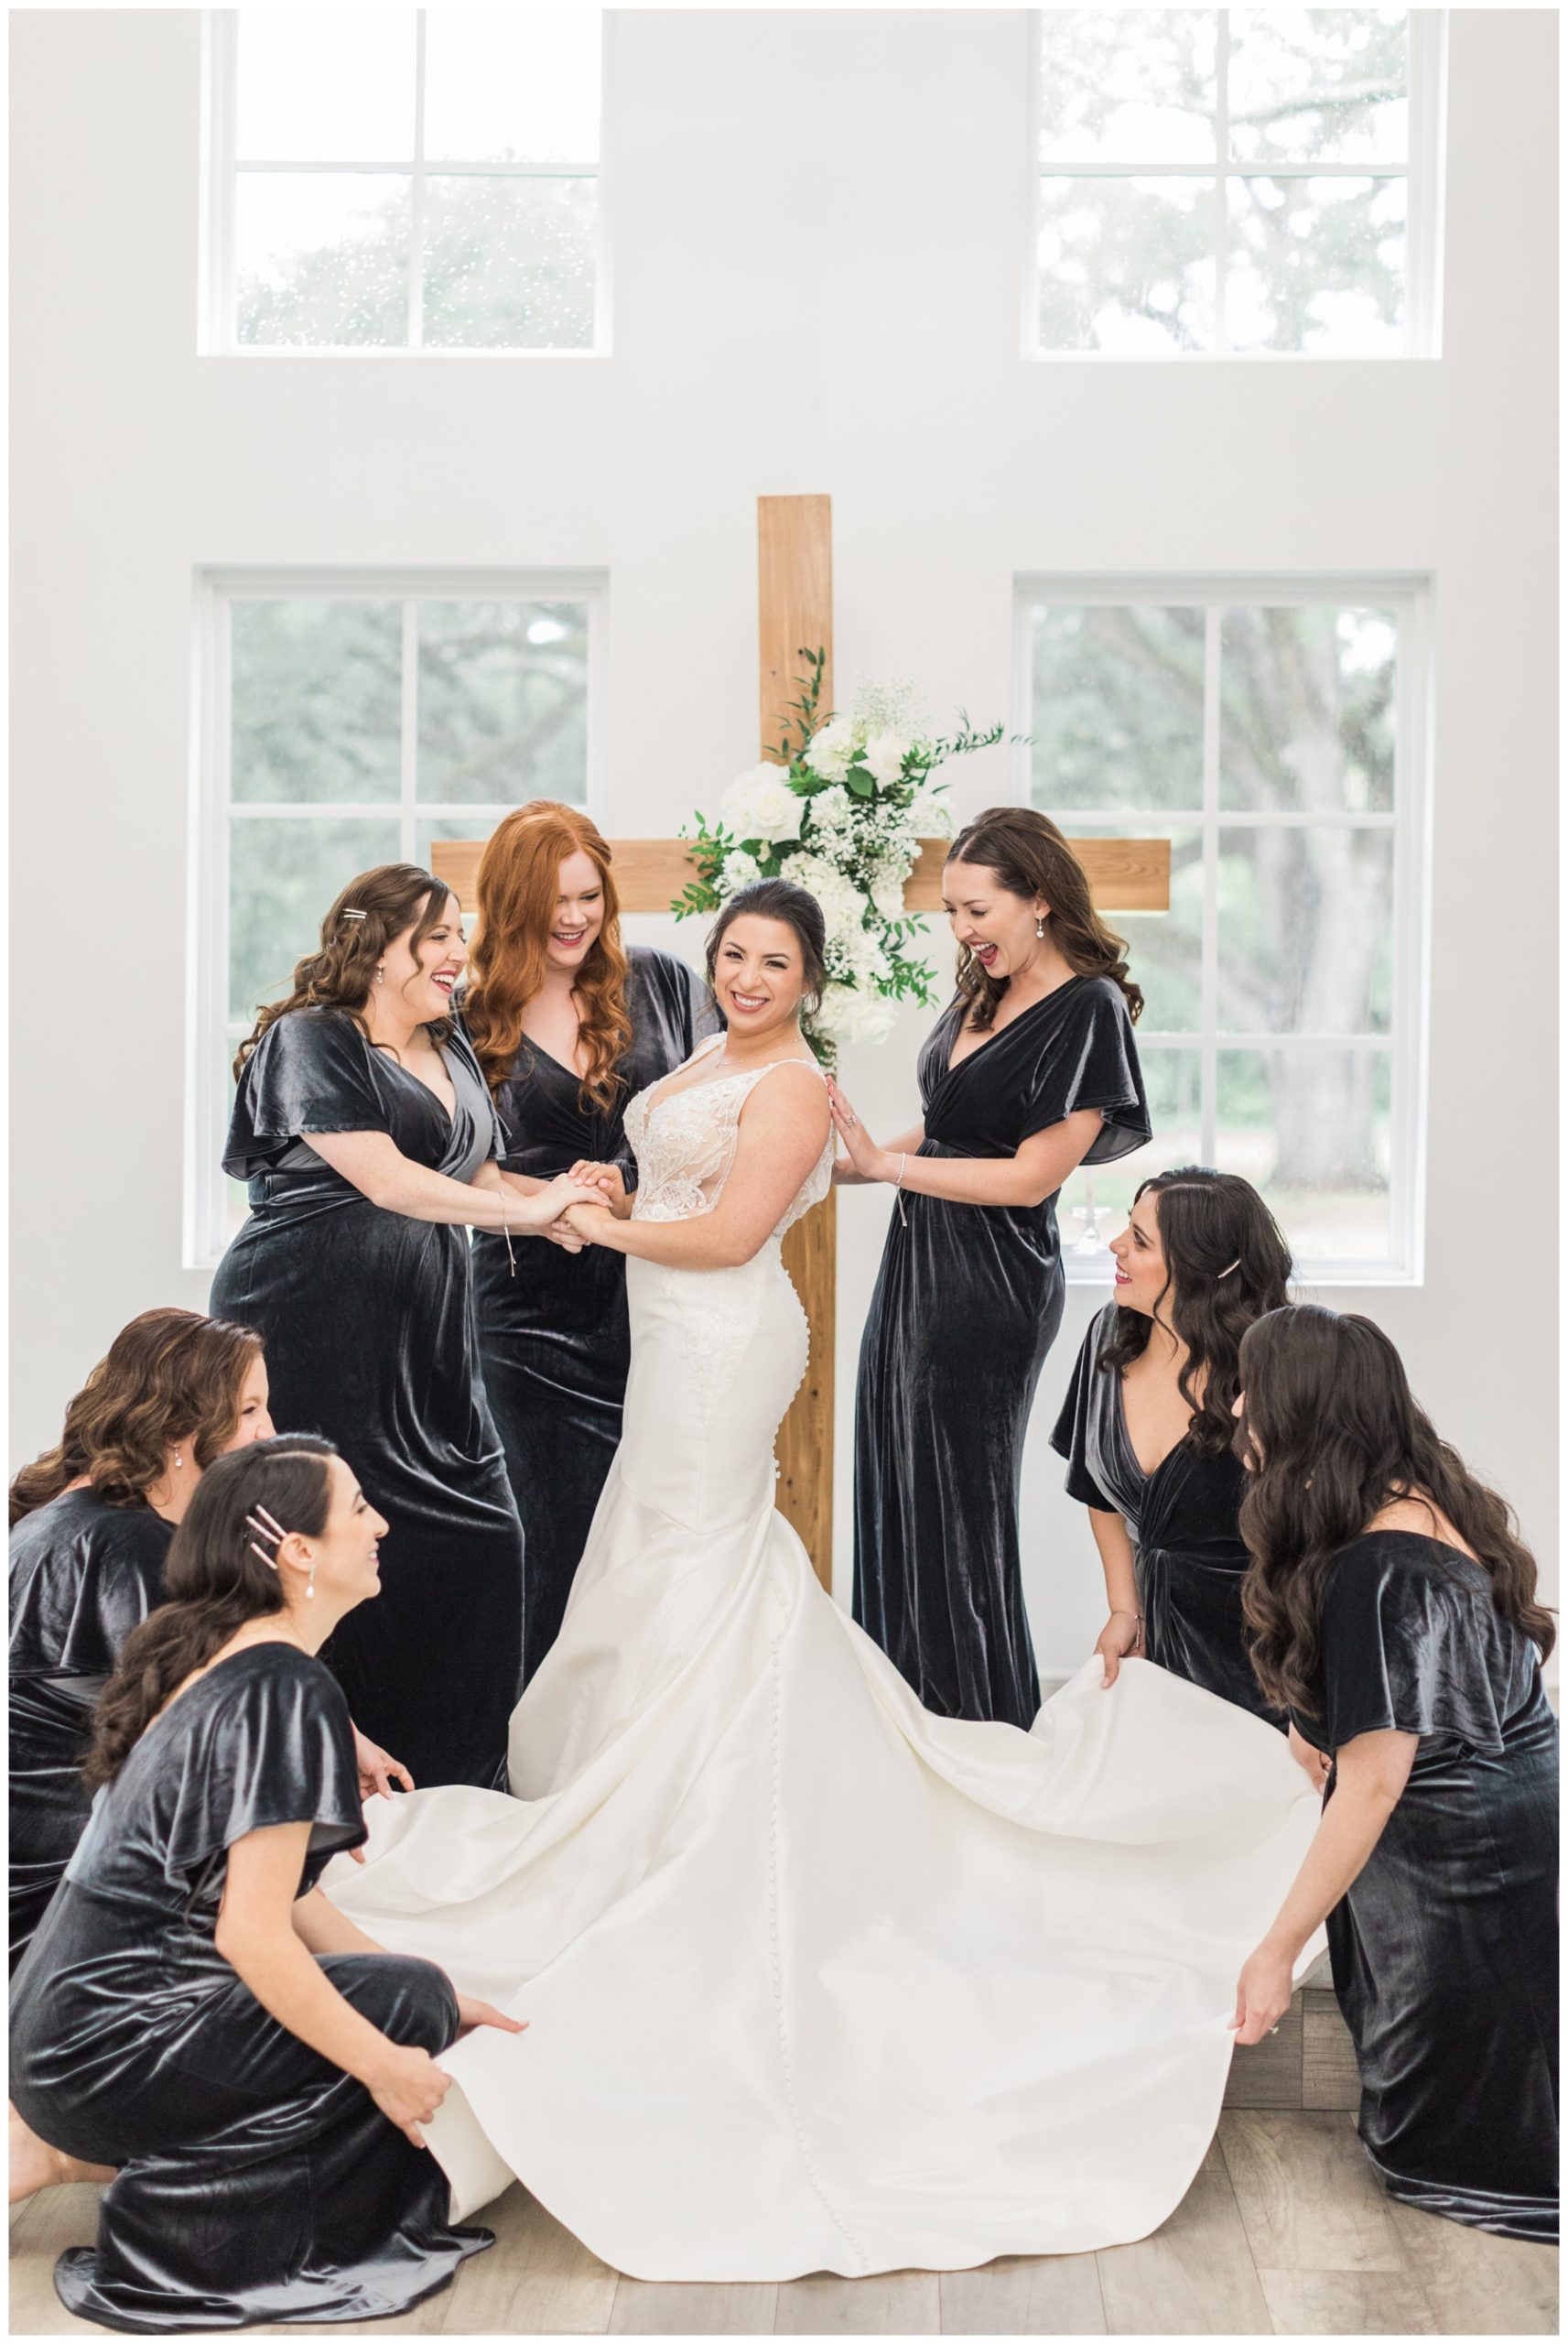 Bridal party portraits at Addison Woods